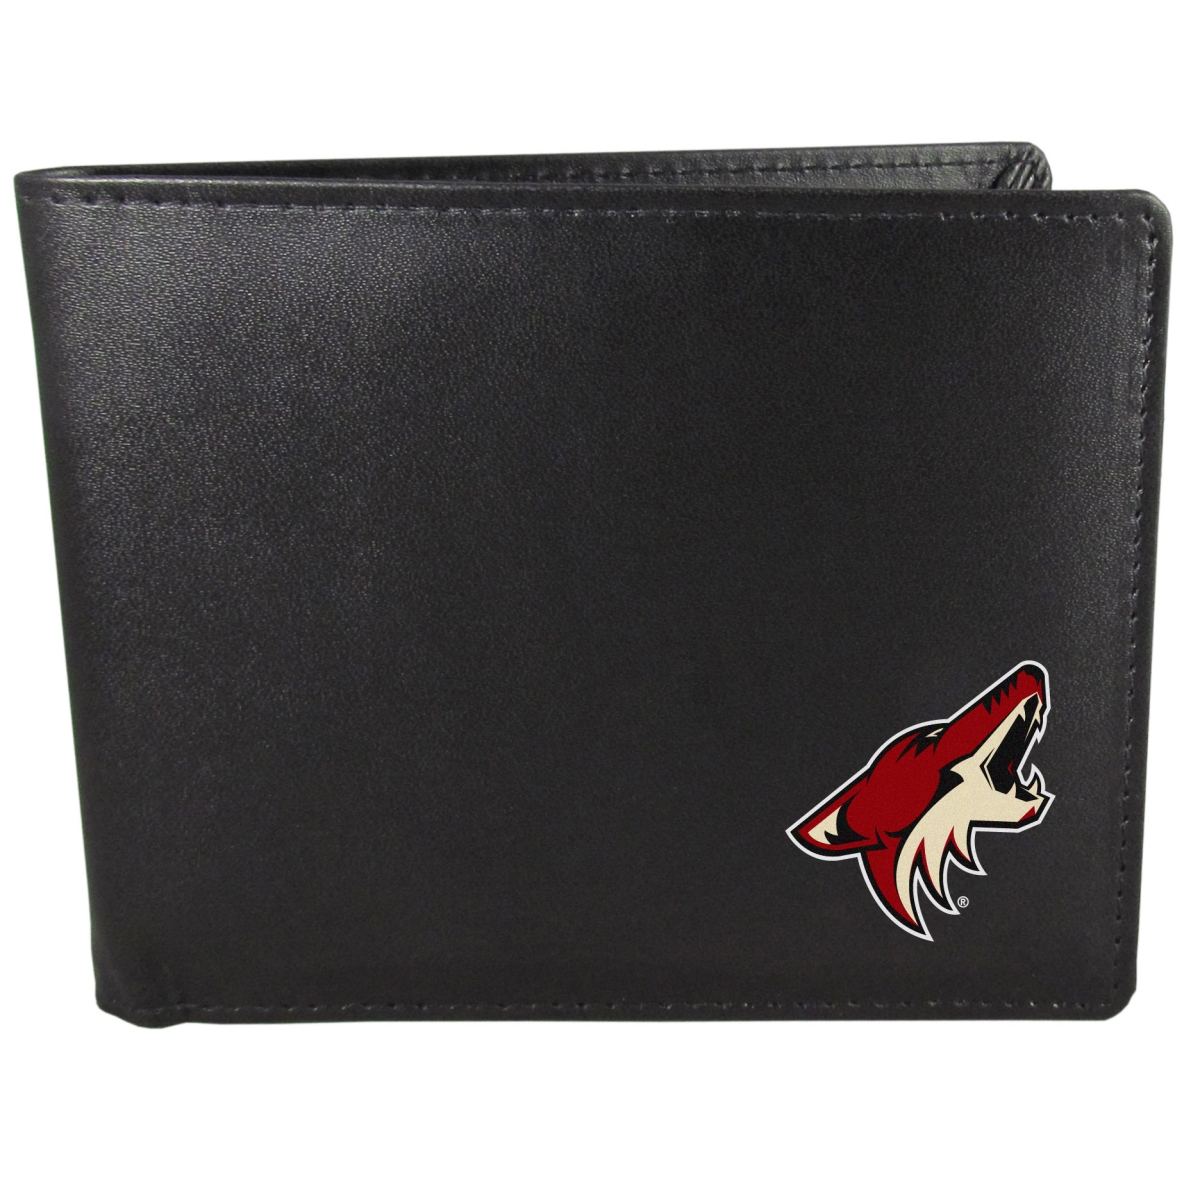 Picture of Siskiyou HBWP45 Male NHL Arizona Coyotes Bi-fold Wallet - One Size